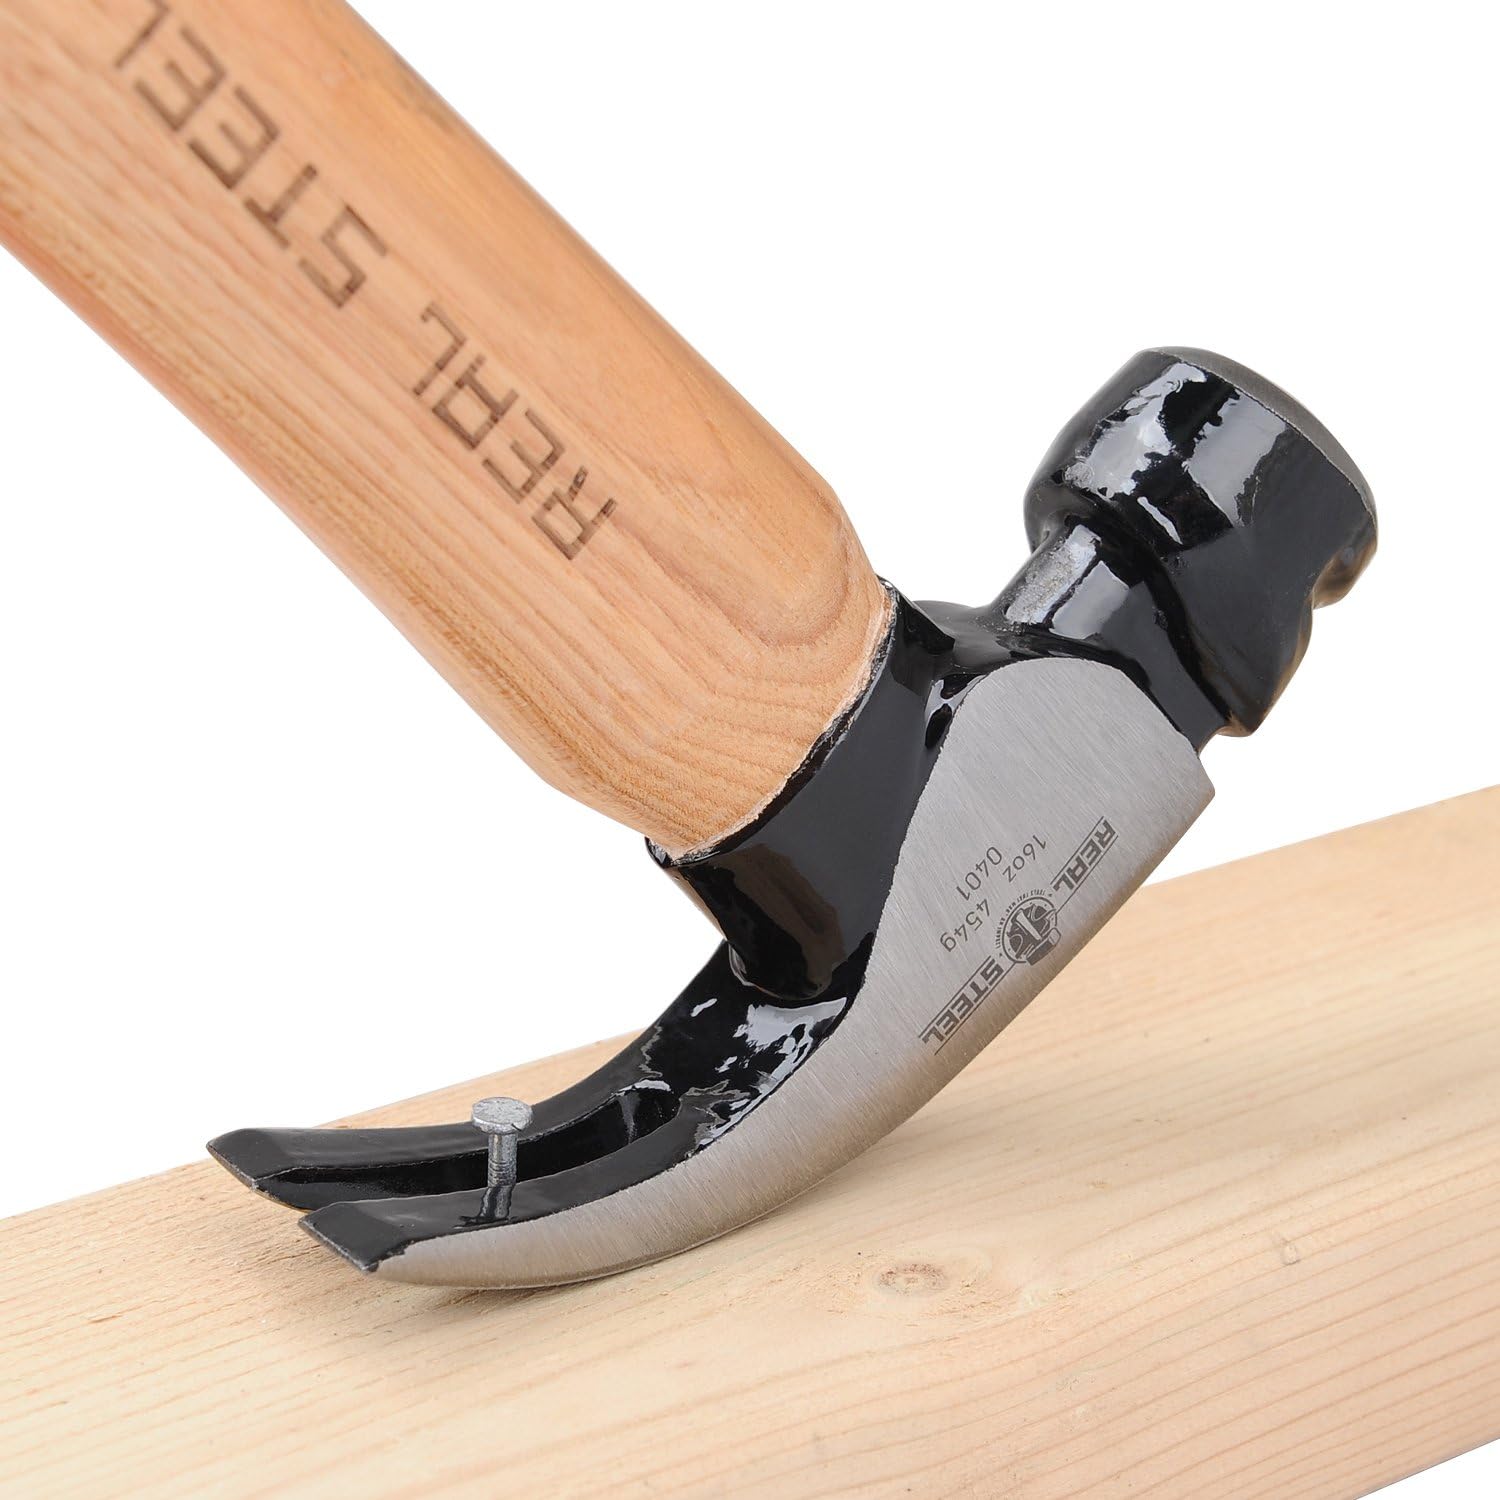 Real Steel Hammer Claw Curved 450g 16oz Hick. Wood Handle RSH0401 Power Tool Services